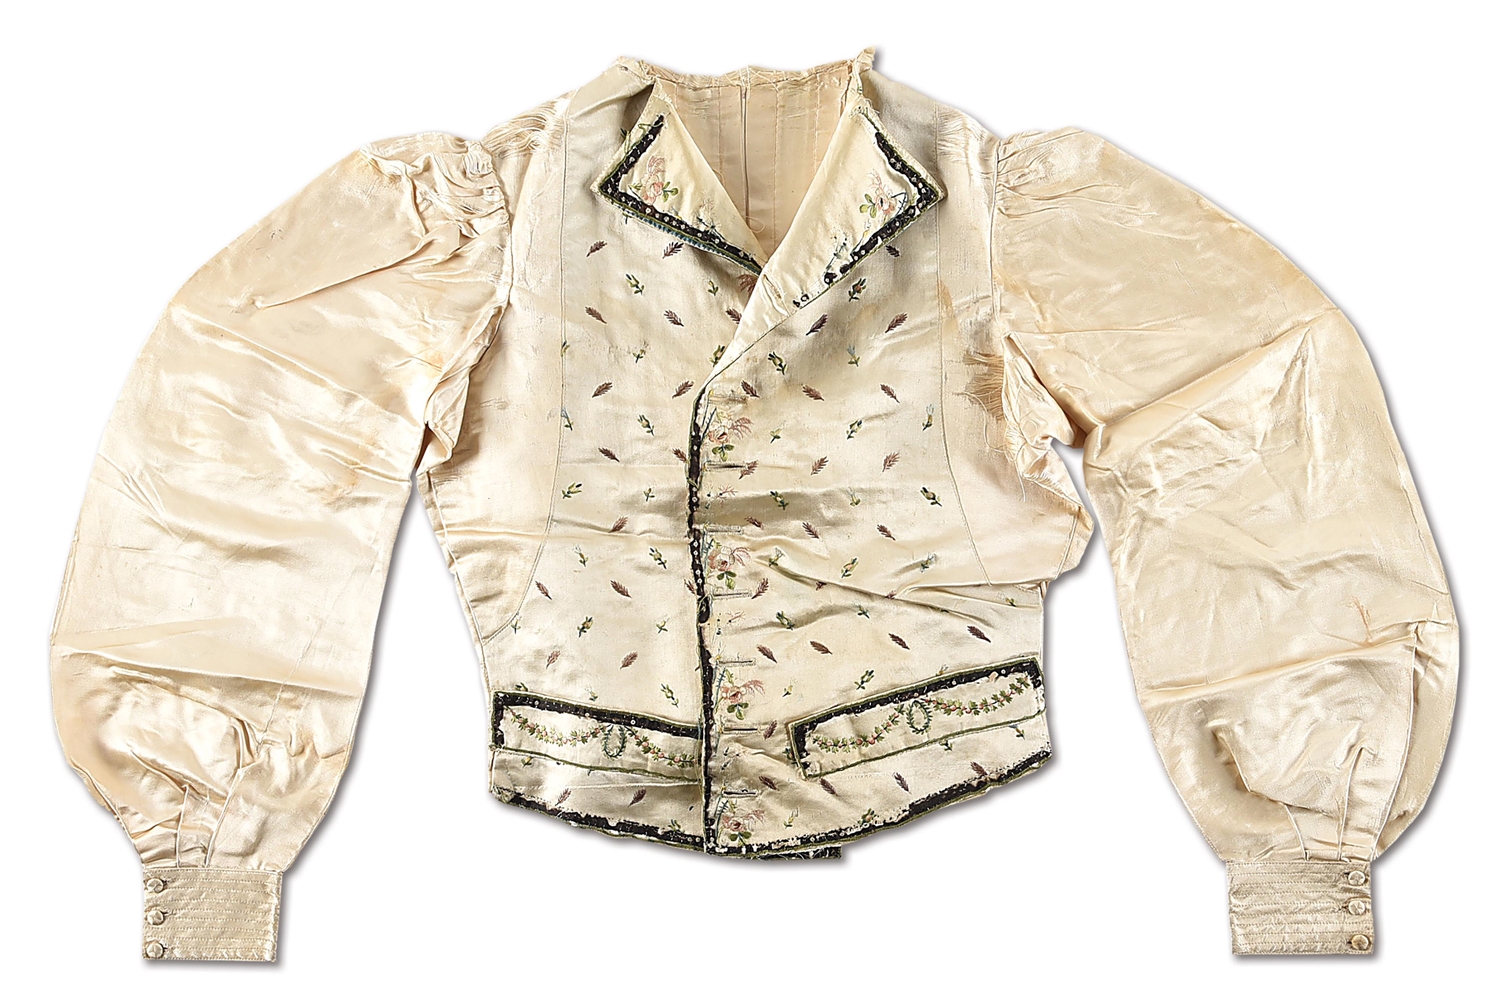 LAFAYETTE ATTRIBUTED EMBROIDERED SILK SLEEVED VEST OR WAISTCOAT.